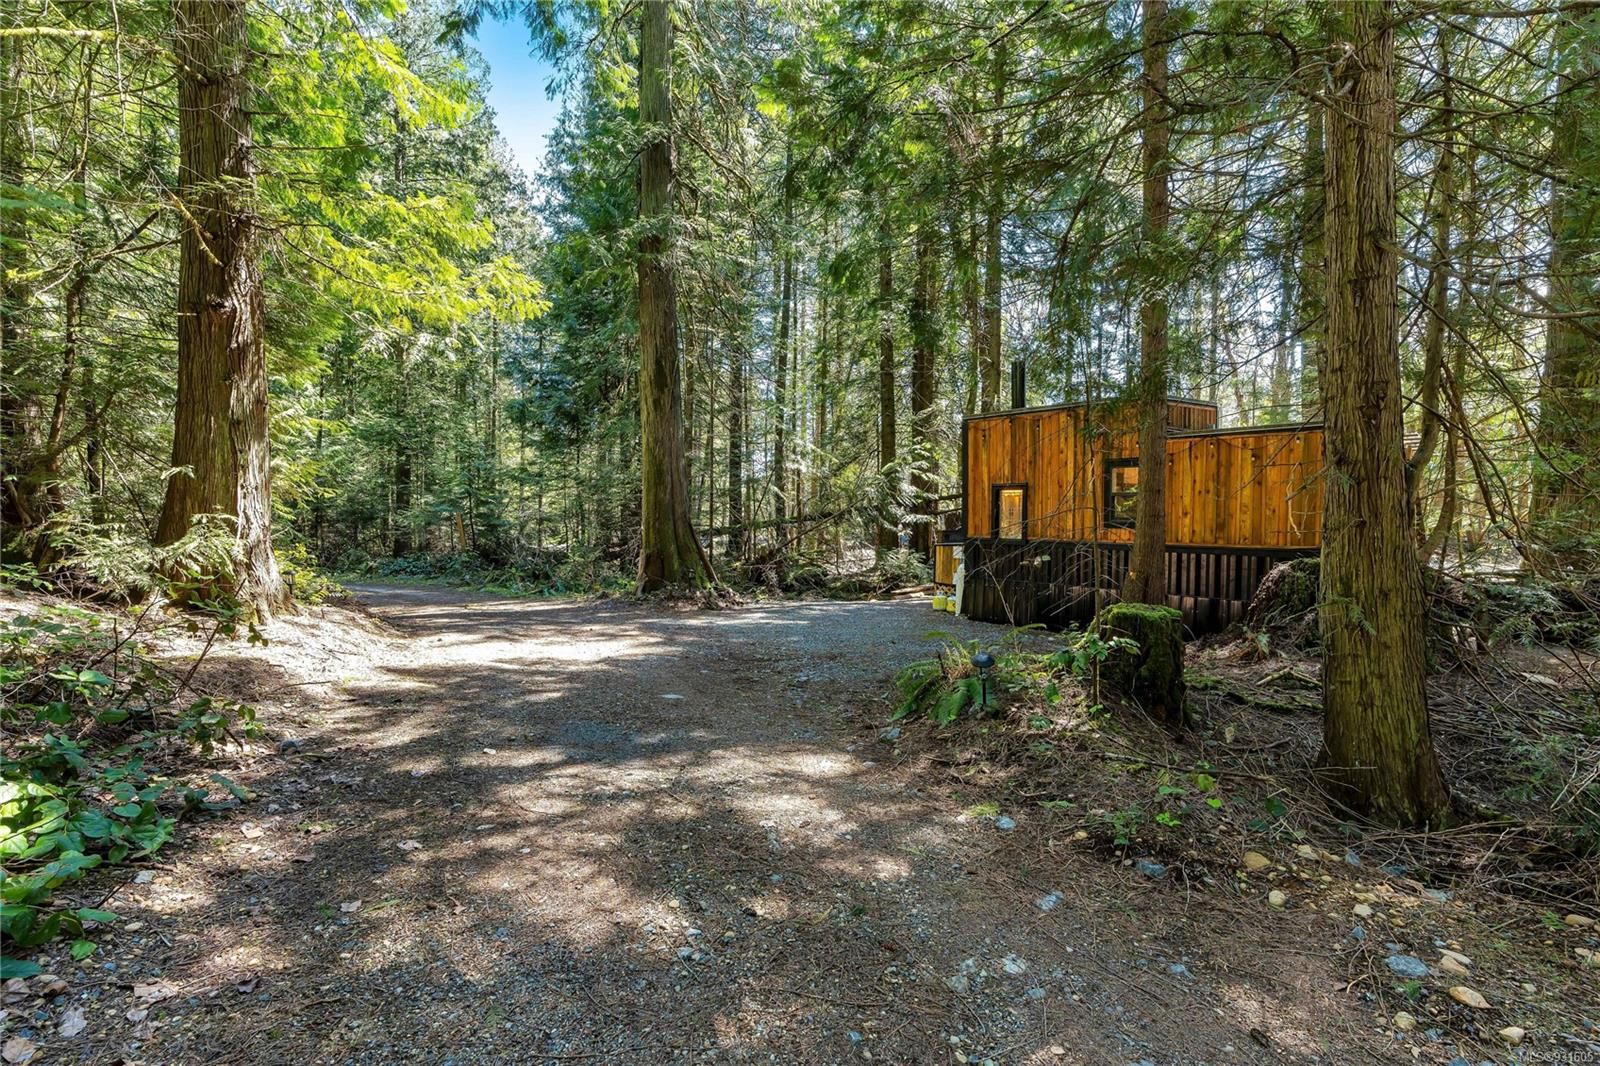 Tiny home nestled in the forest